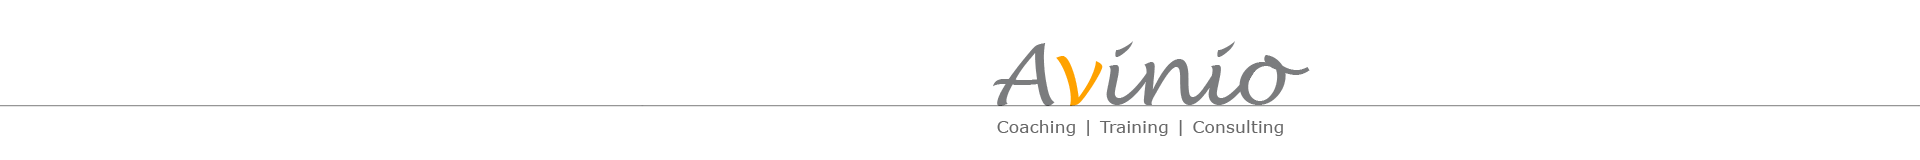 Systemisches Coaching, Consulting, Beratung, Konflikttraining